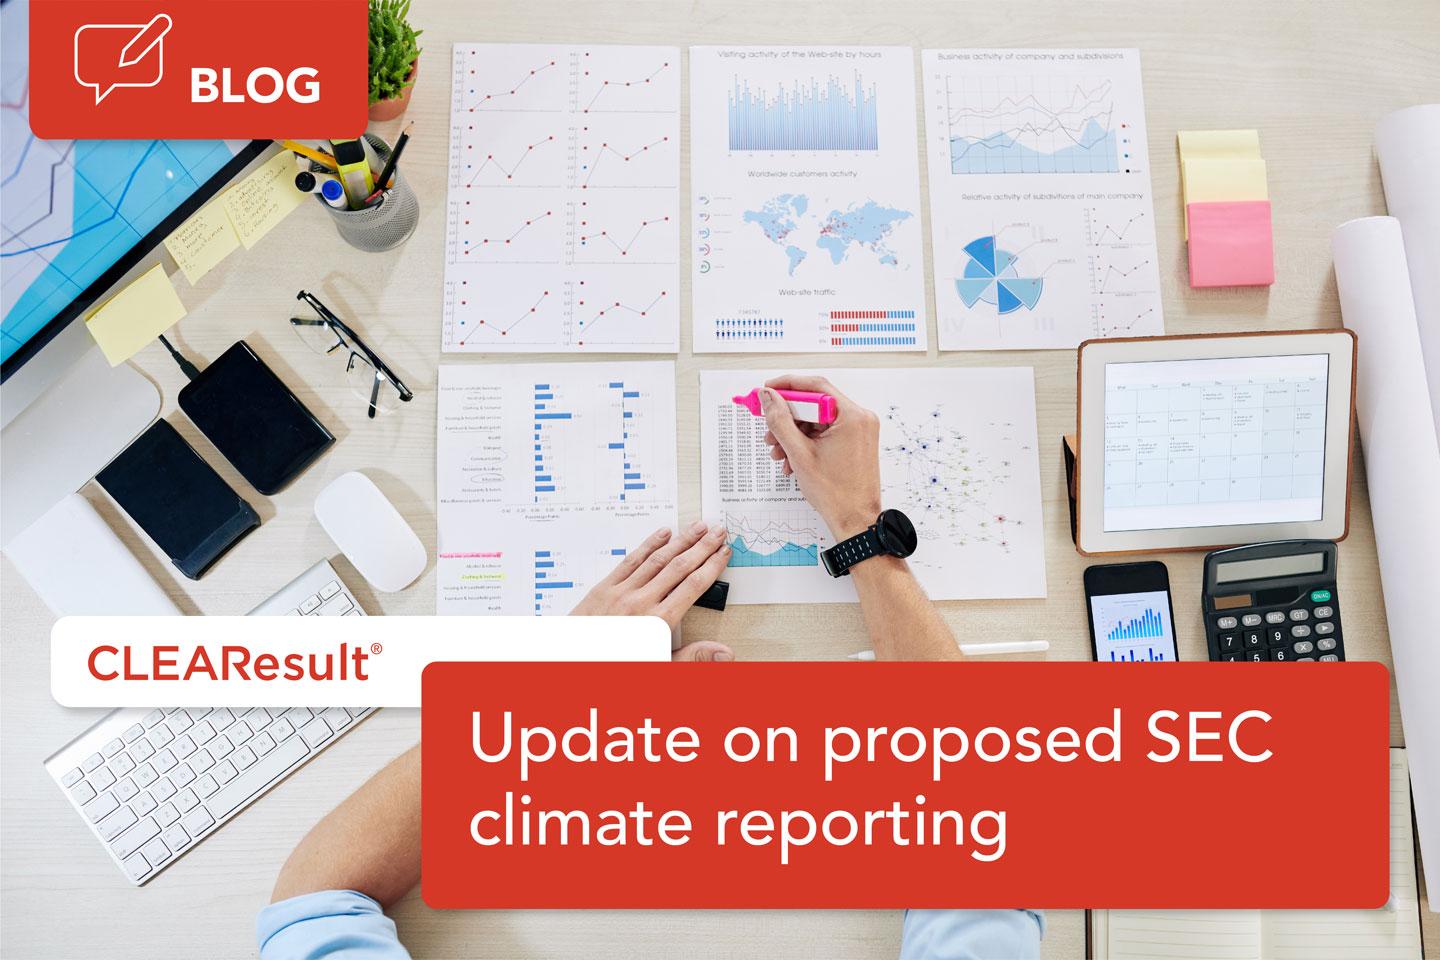 Update on proposed SEC climate reporting